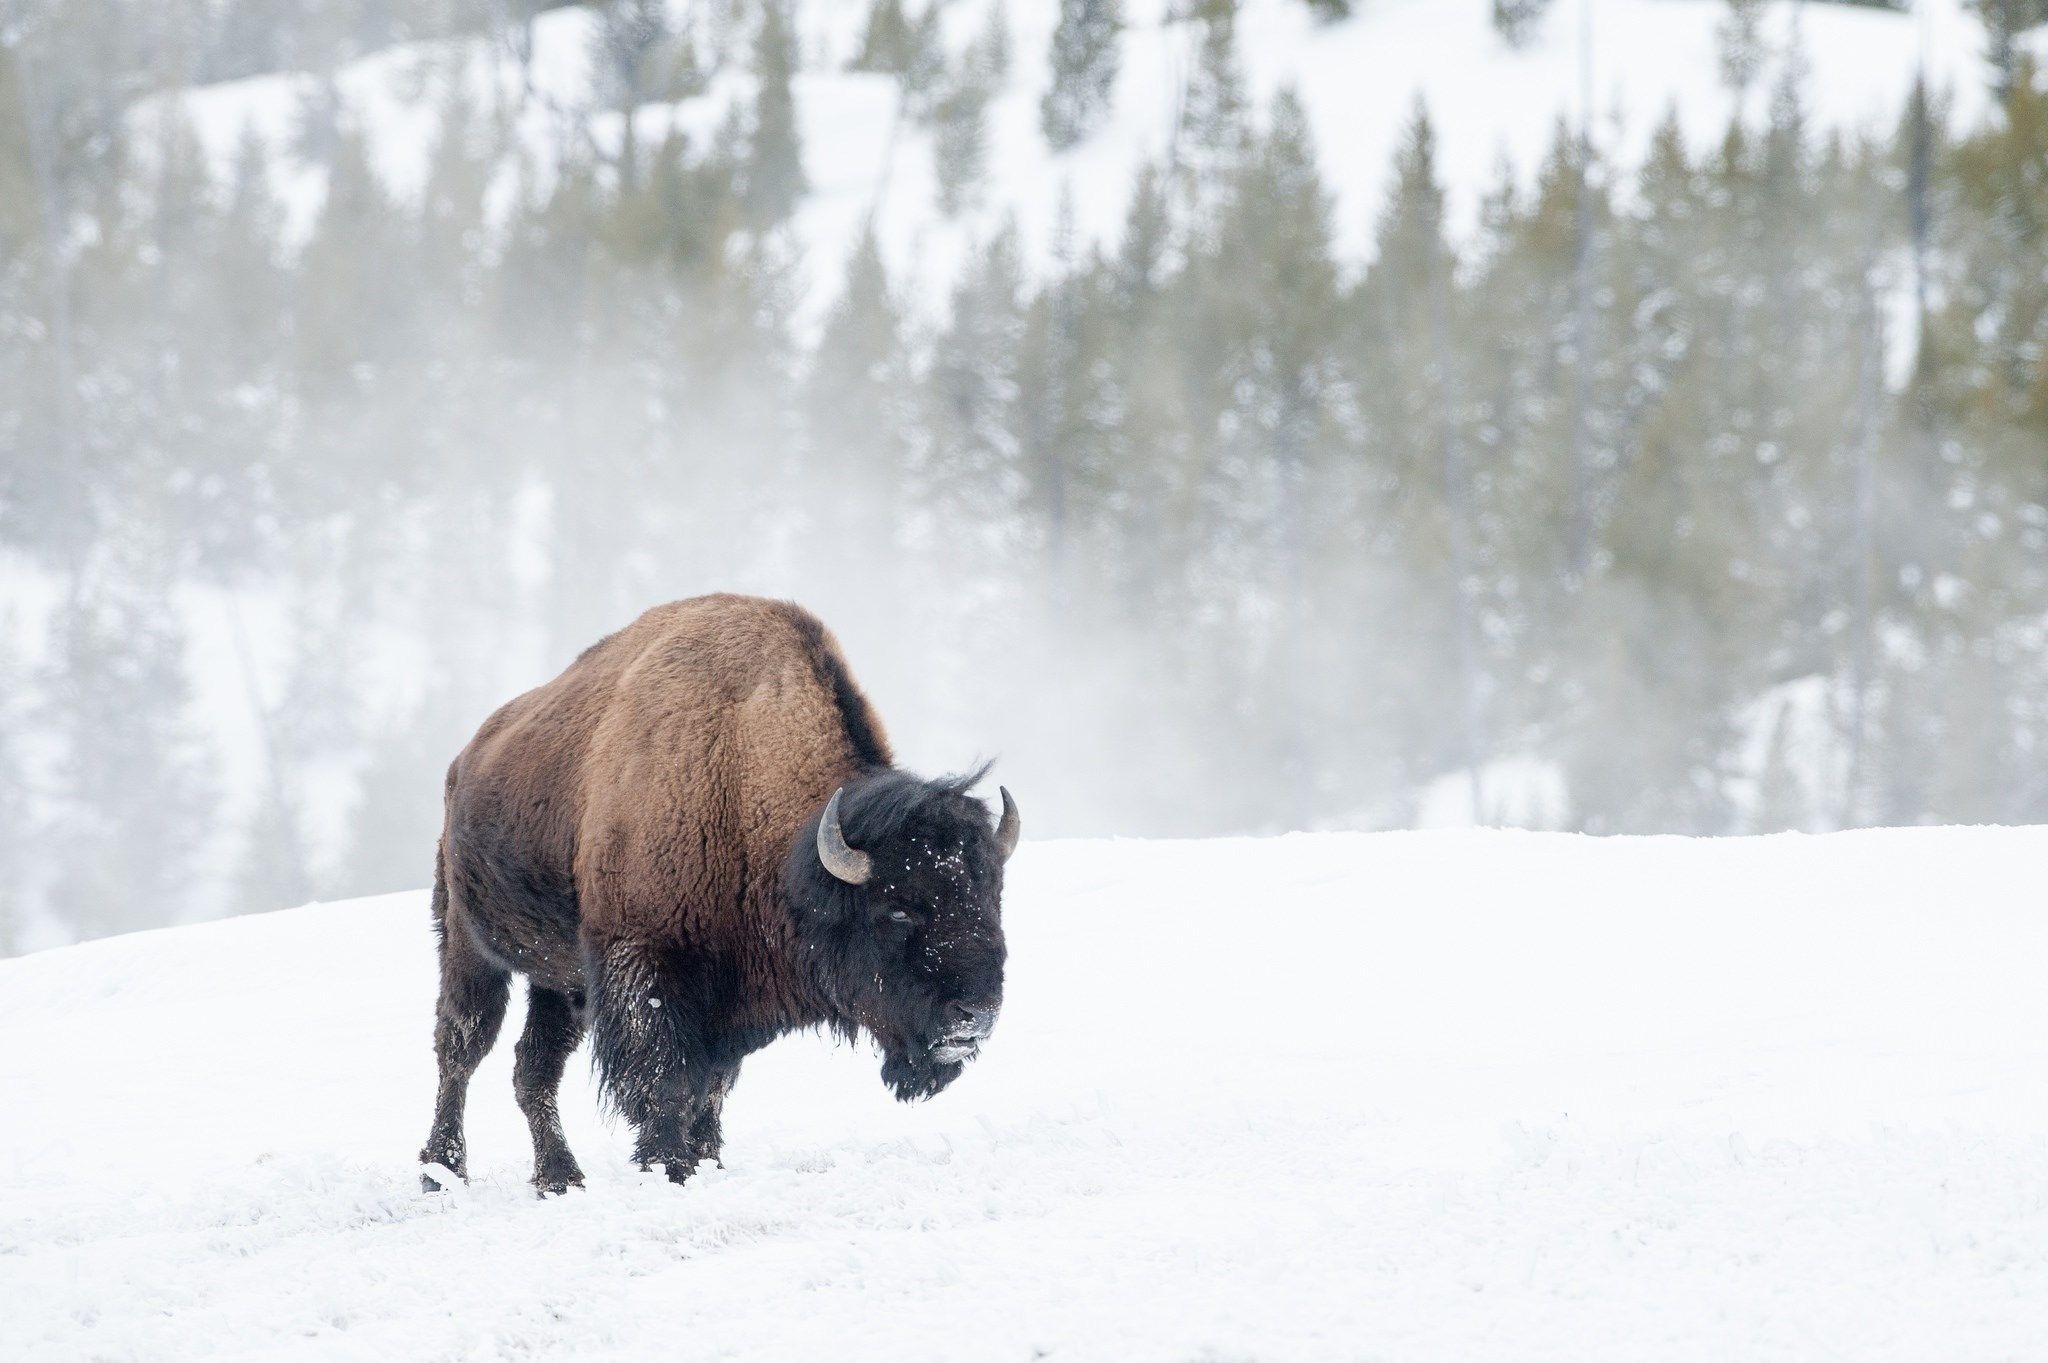 2048x1363 Wallpaper Of An American Bison On A Snowy Mountain